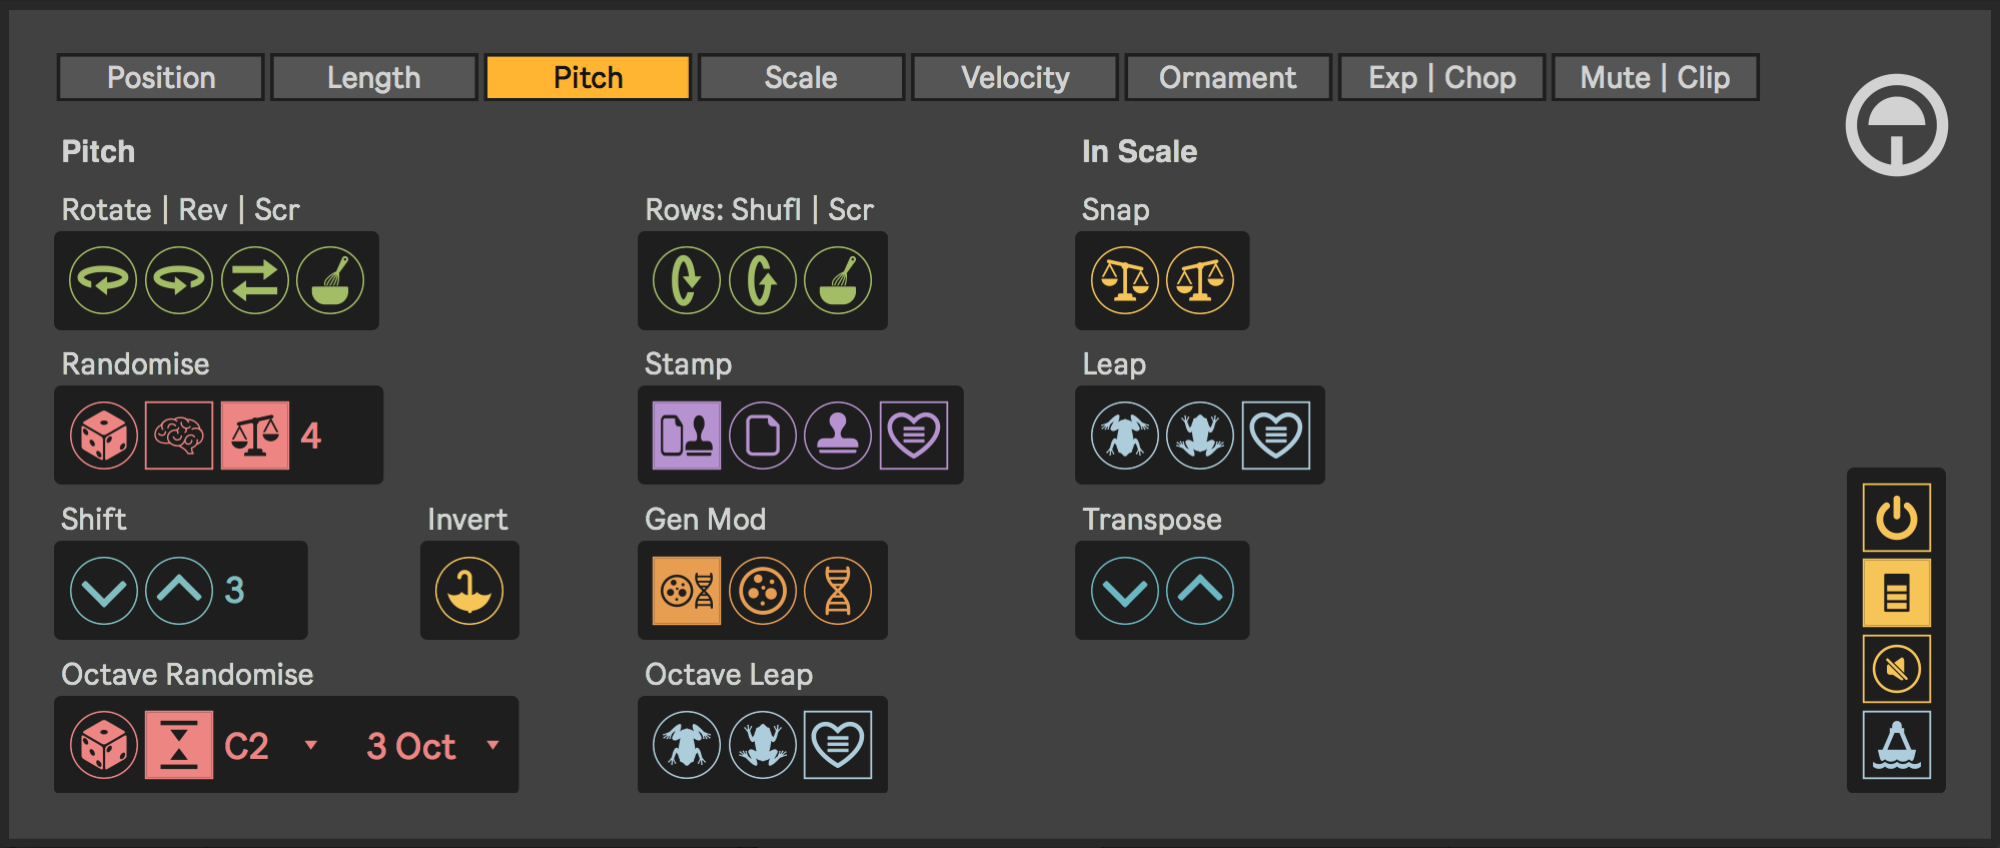 The Pitch edit page of Tranz4ma’s graphical user interface.